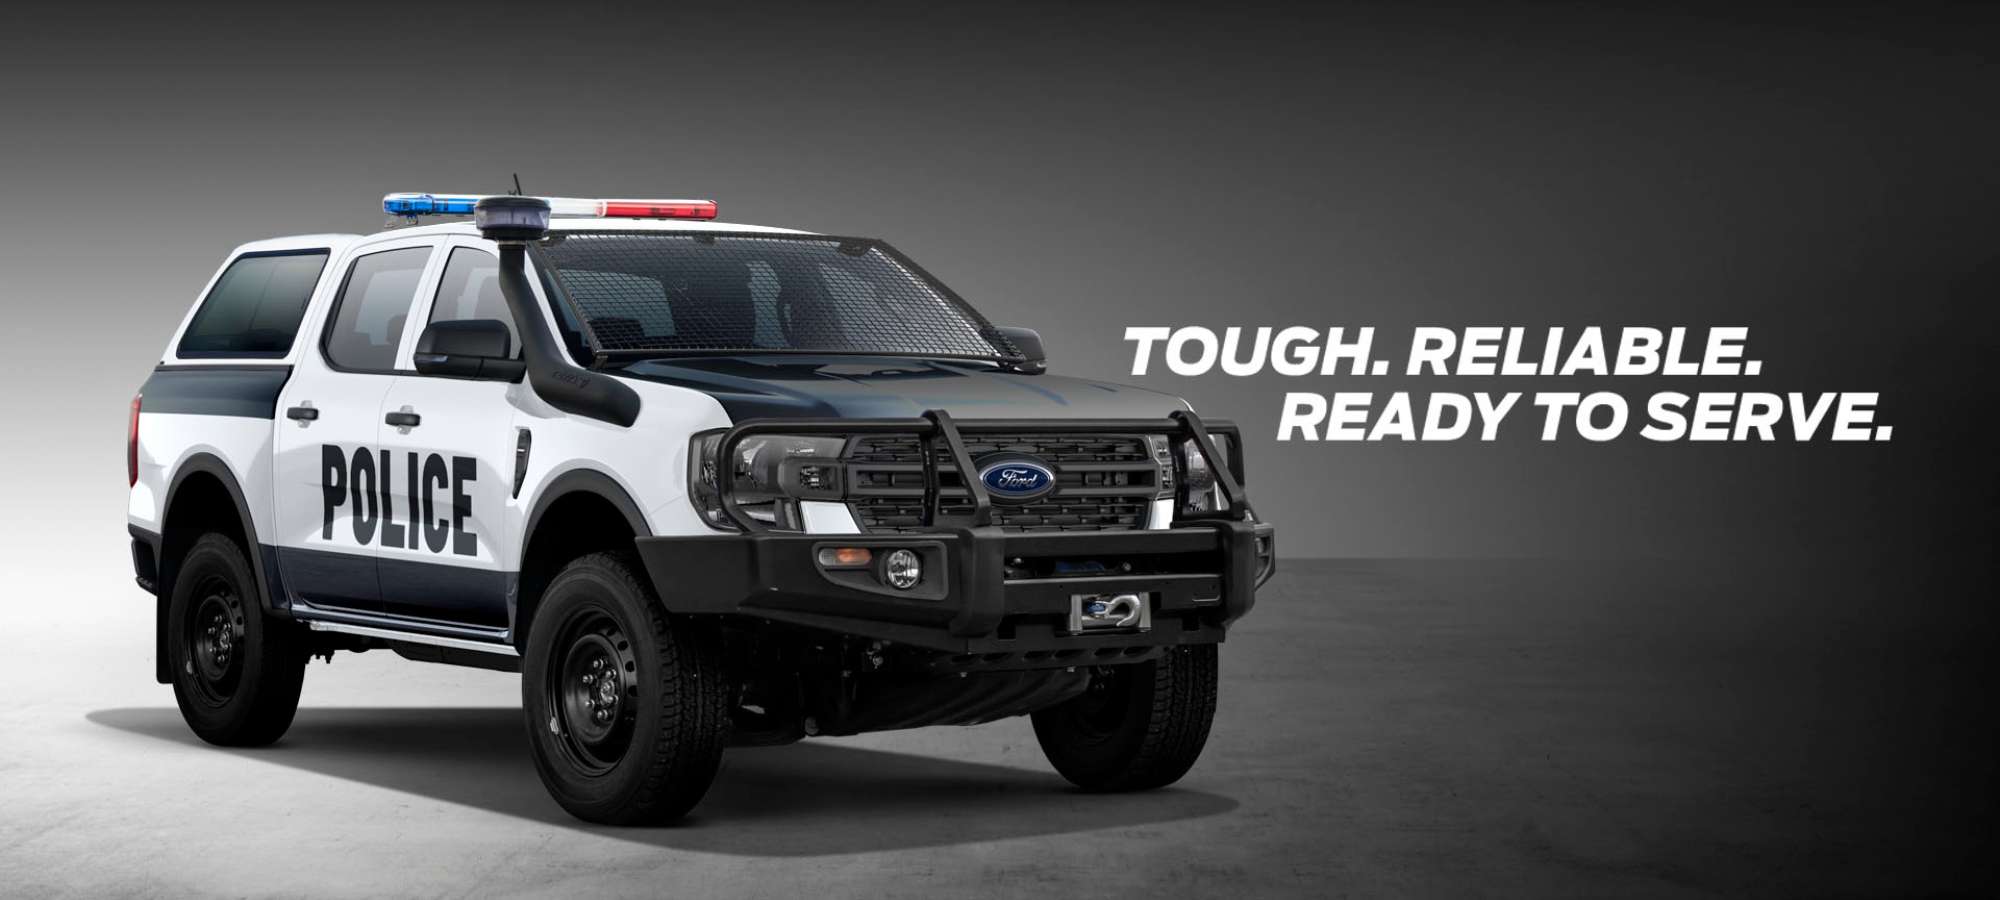 https://ford.globalfleetsales.net/wp-content/uploads/2023/02/ford-ranger-police-truck-with-canopy-vehicle-banner.jpg